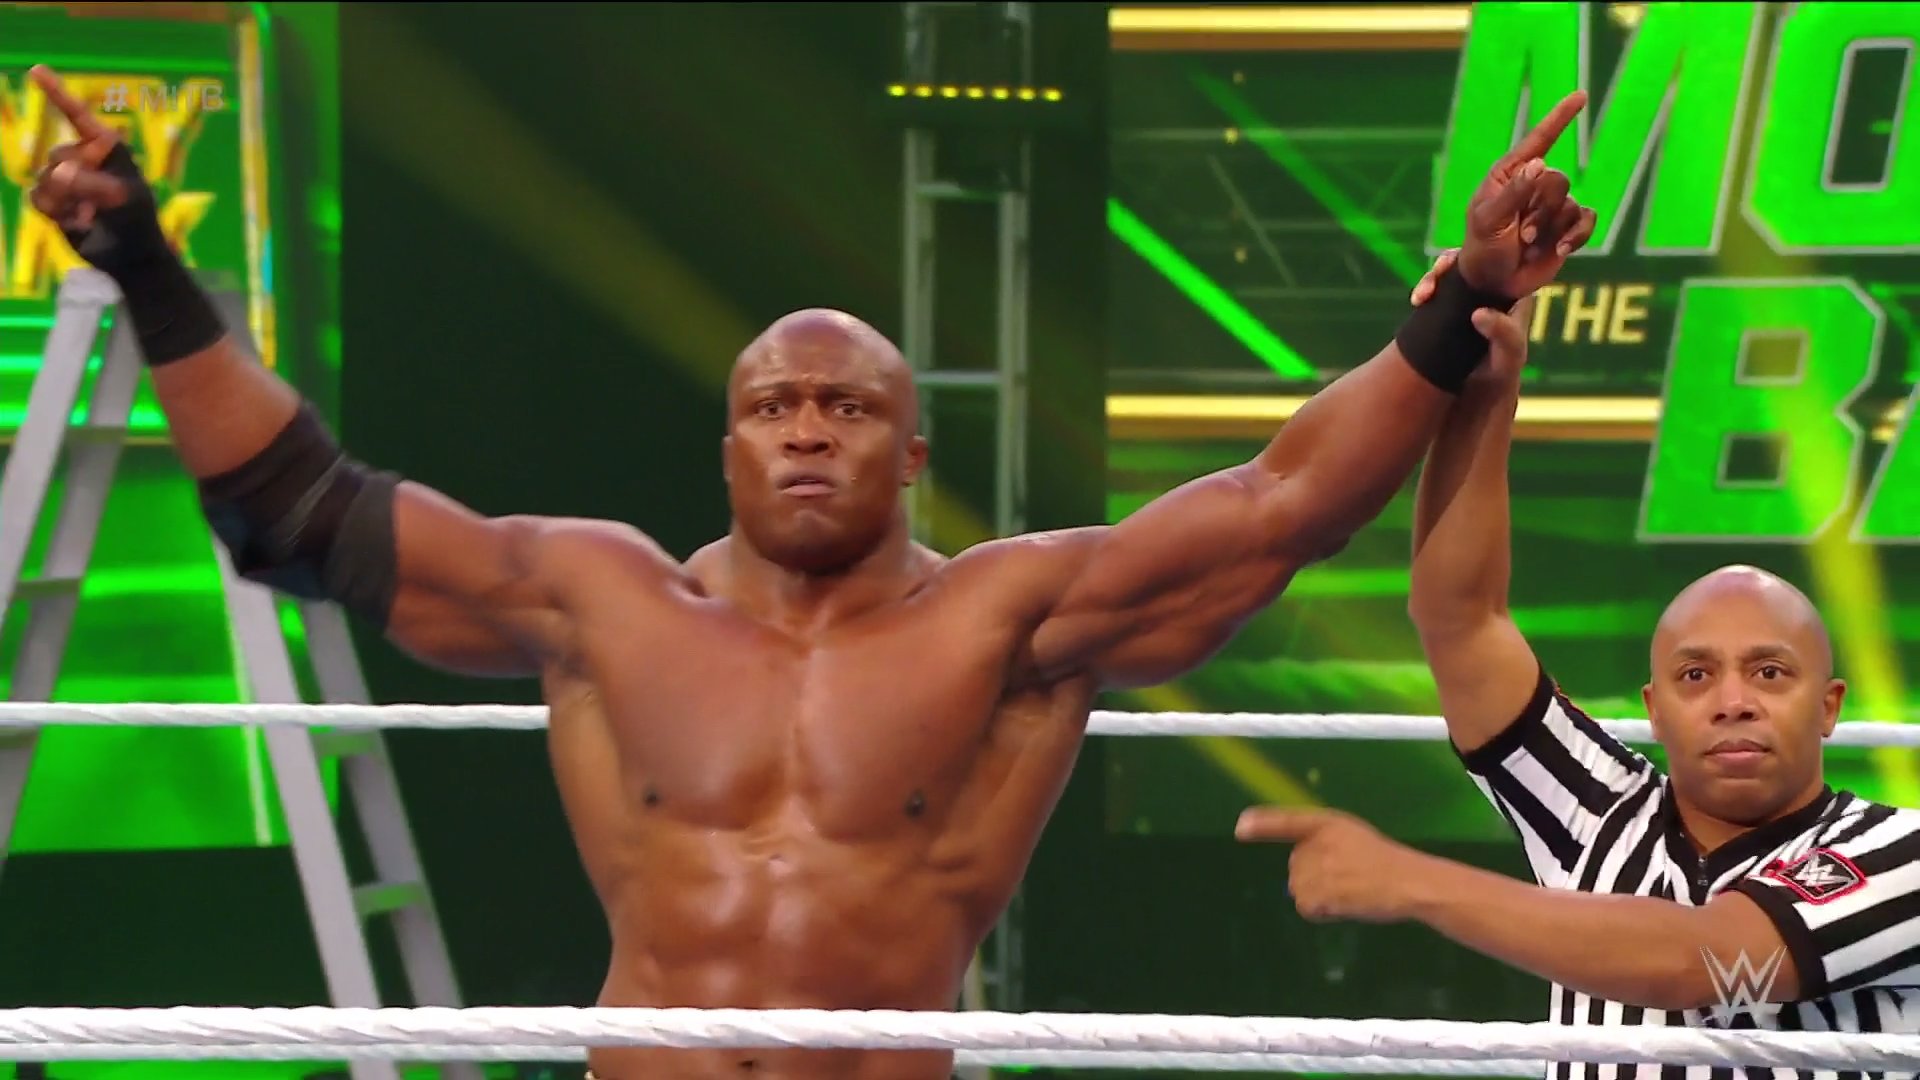 WWE Money in the Bank: Bobby Lashley vence a R Truth